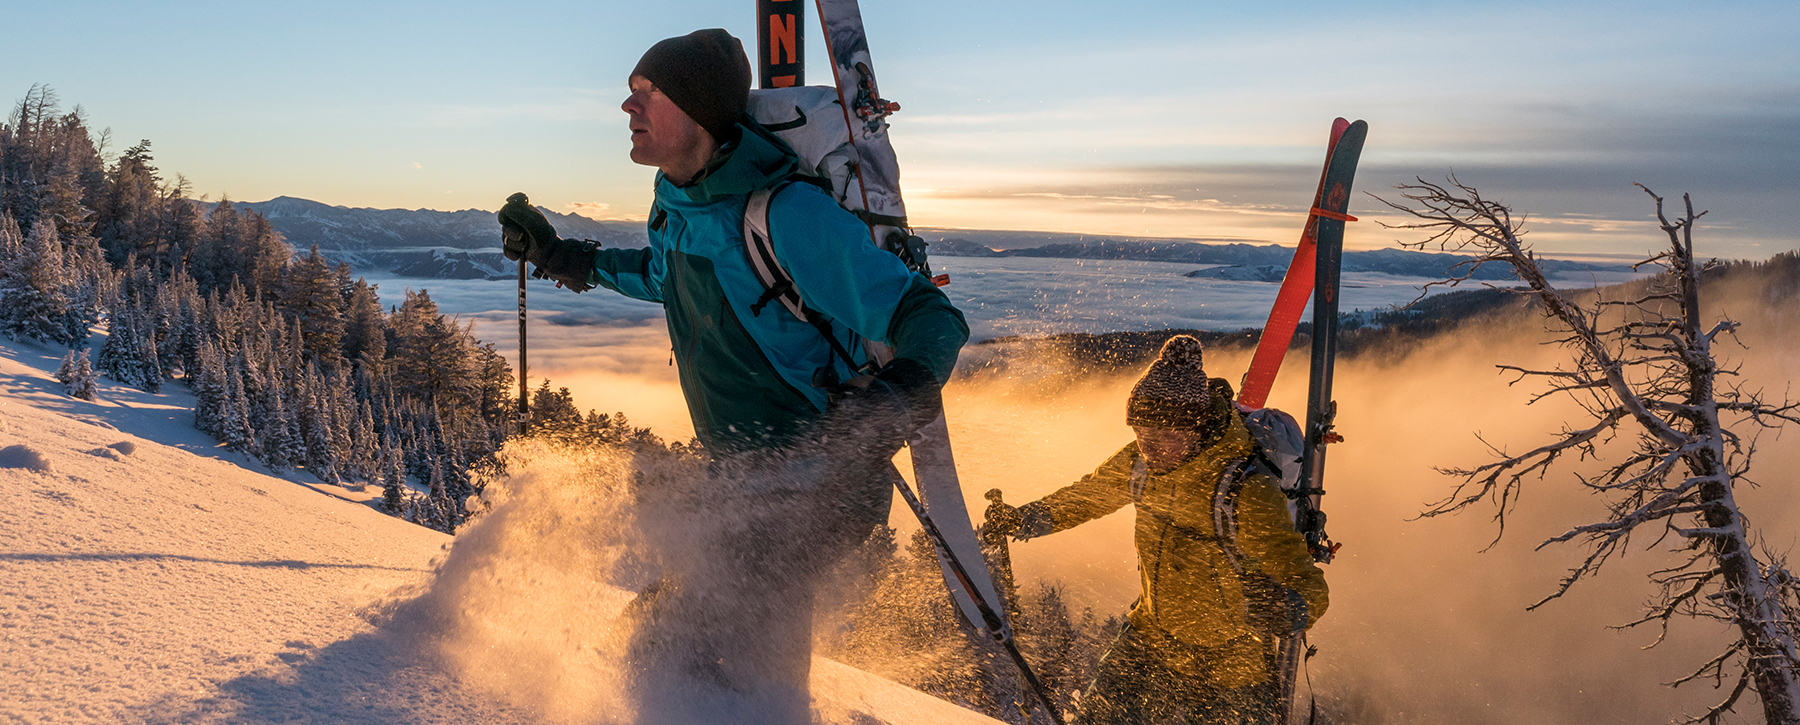 Two skiers hiking their way up in the backcountry at sunrise.